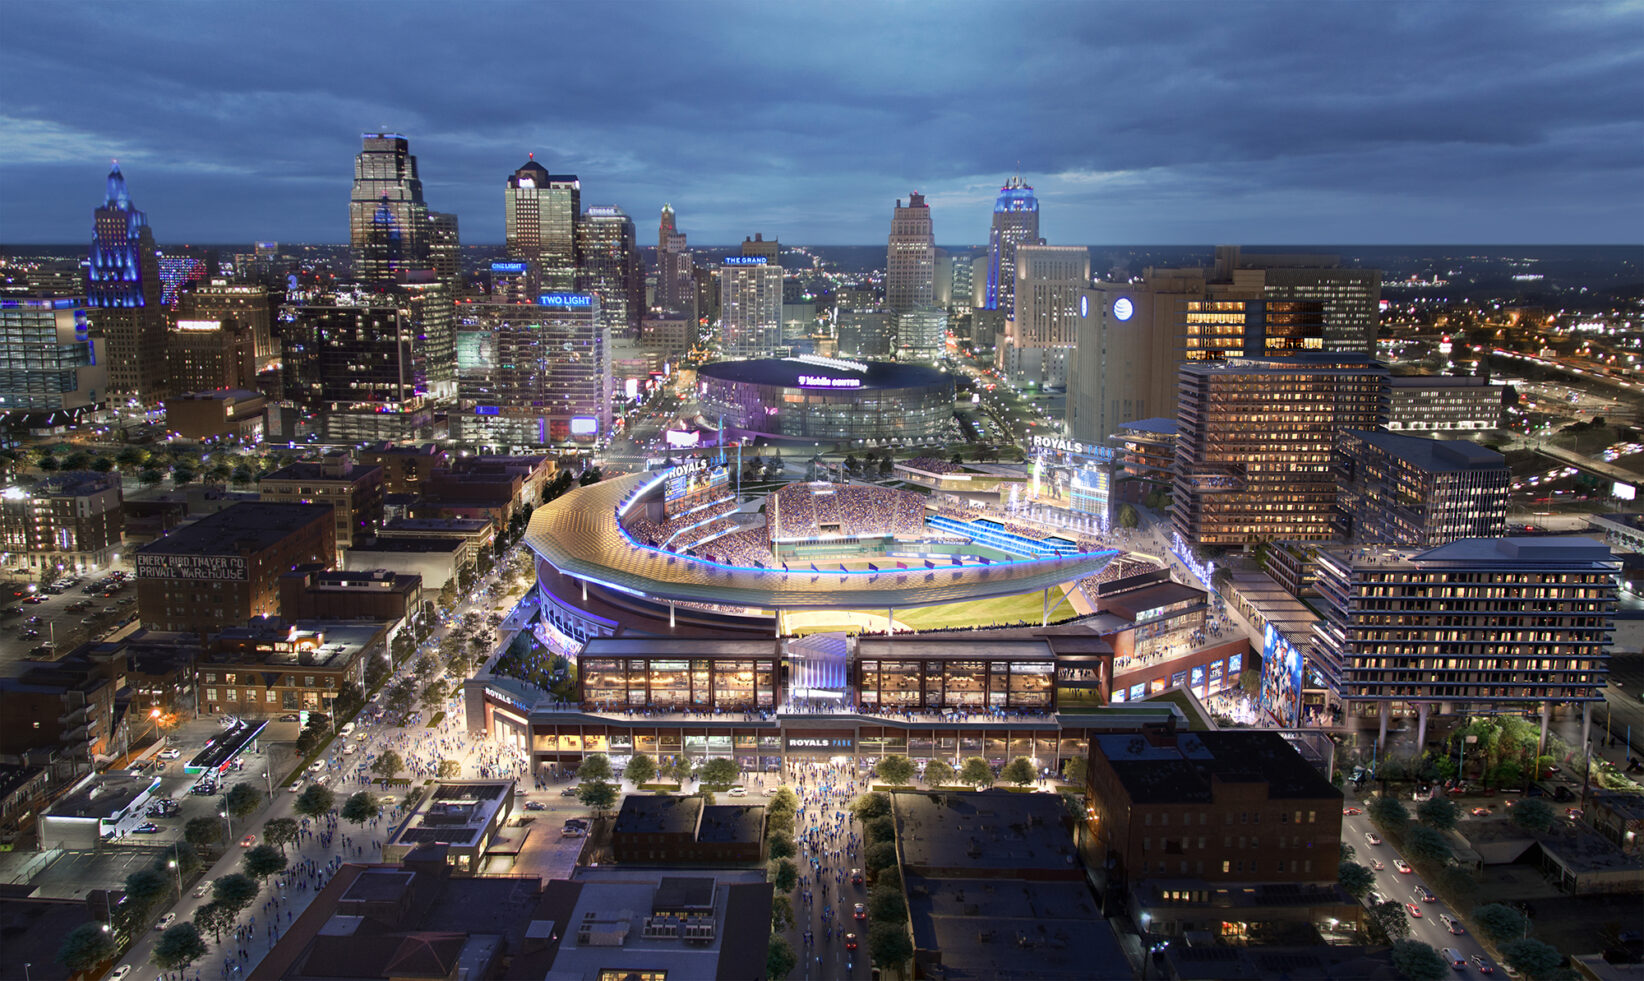 Why are many small businesses against the new Royals stadium?